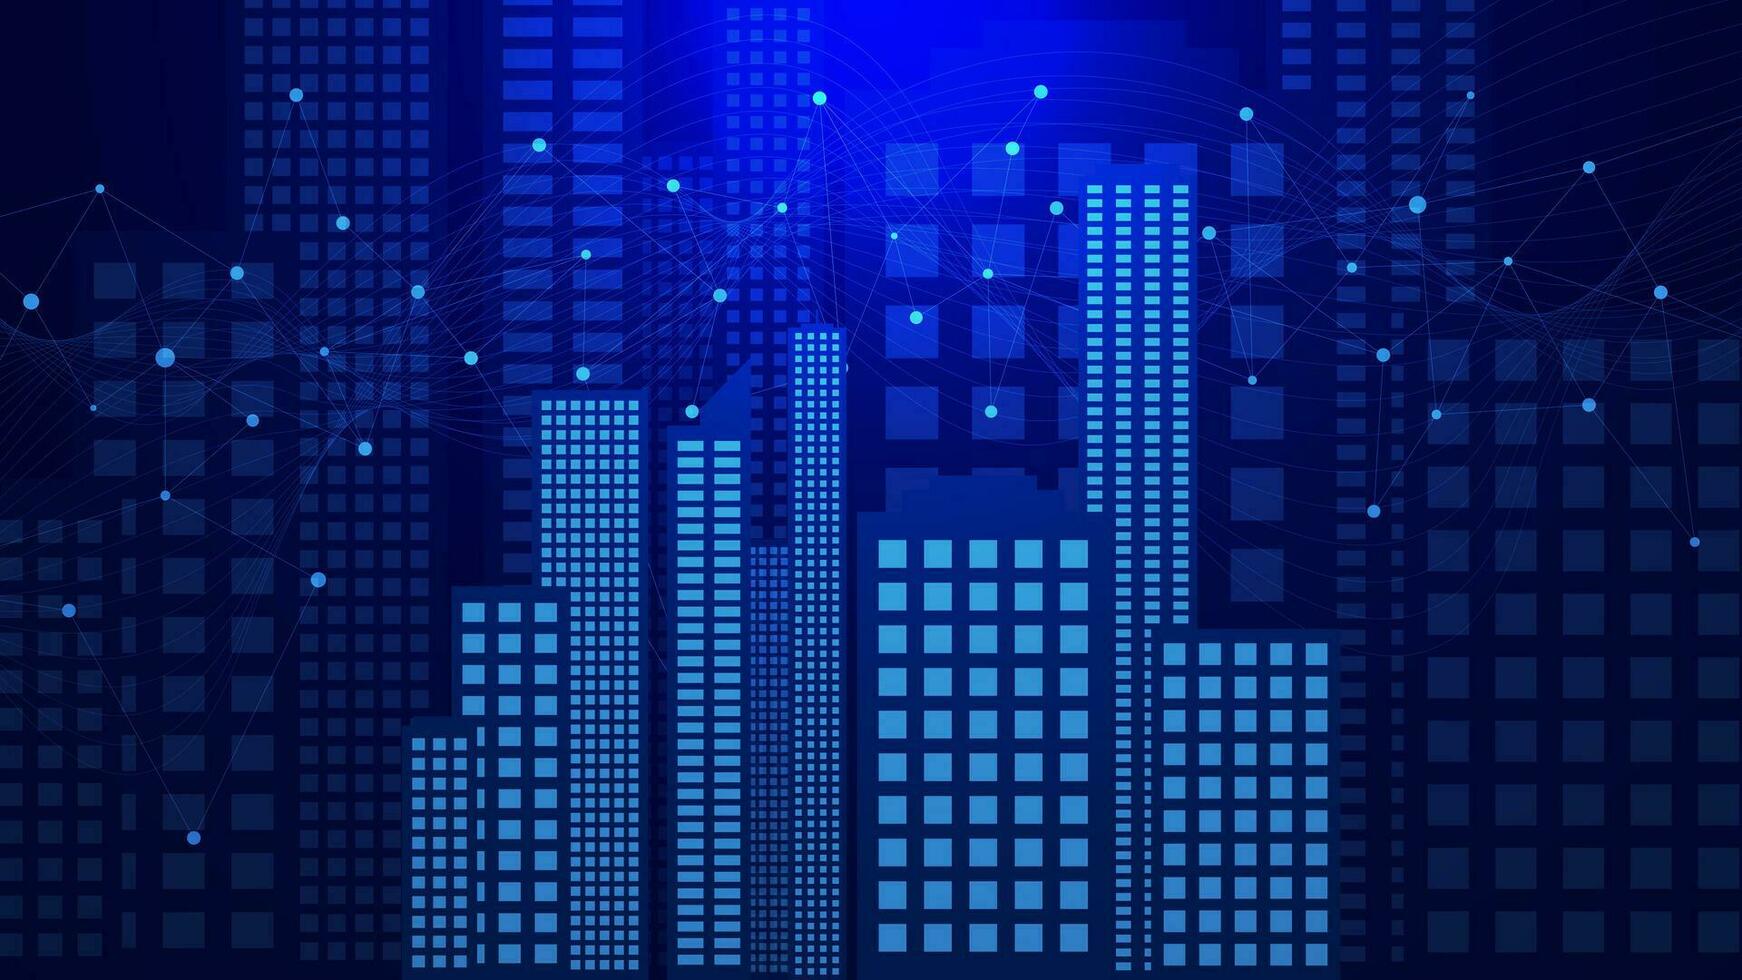 Office building or cityscape with connecting dots and lines on a dark blue background. Smart city and business connection technology concept. Vector illustration.